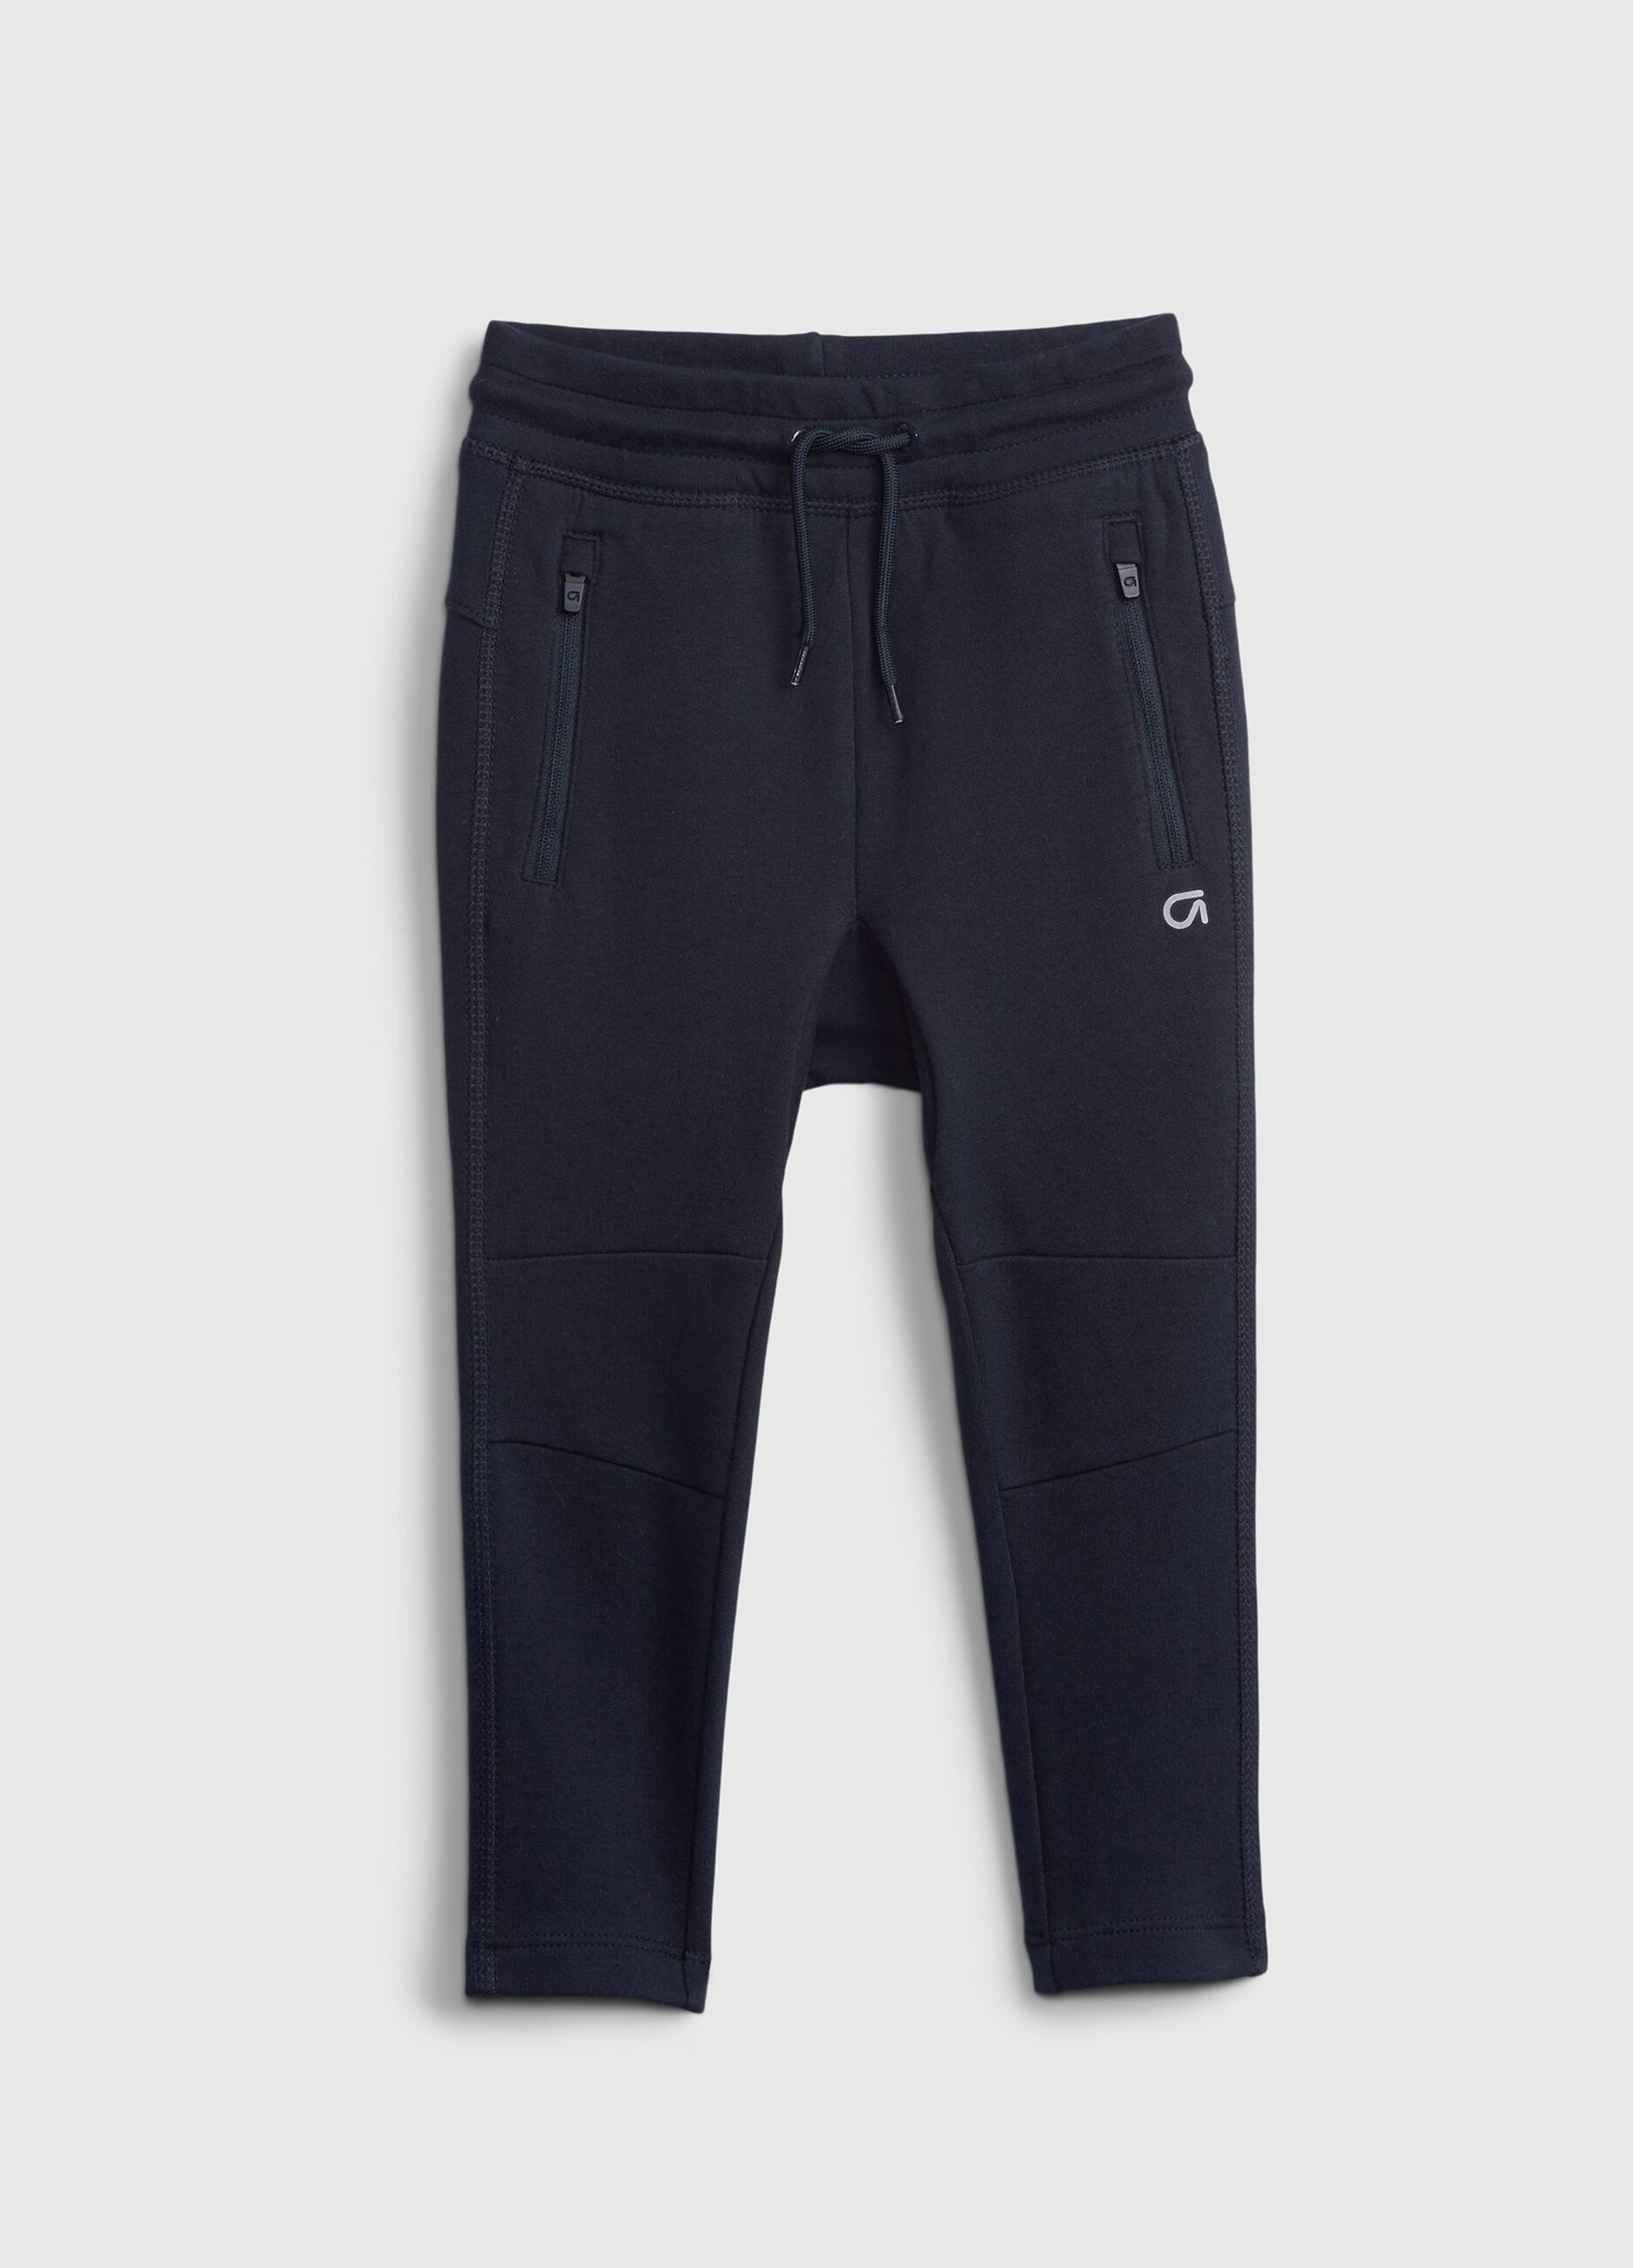 Joggers in technical fabric